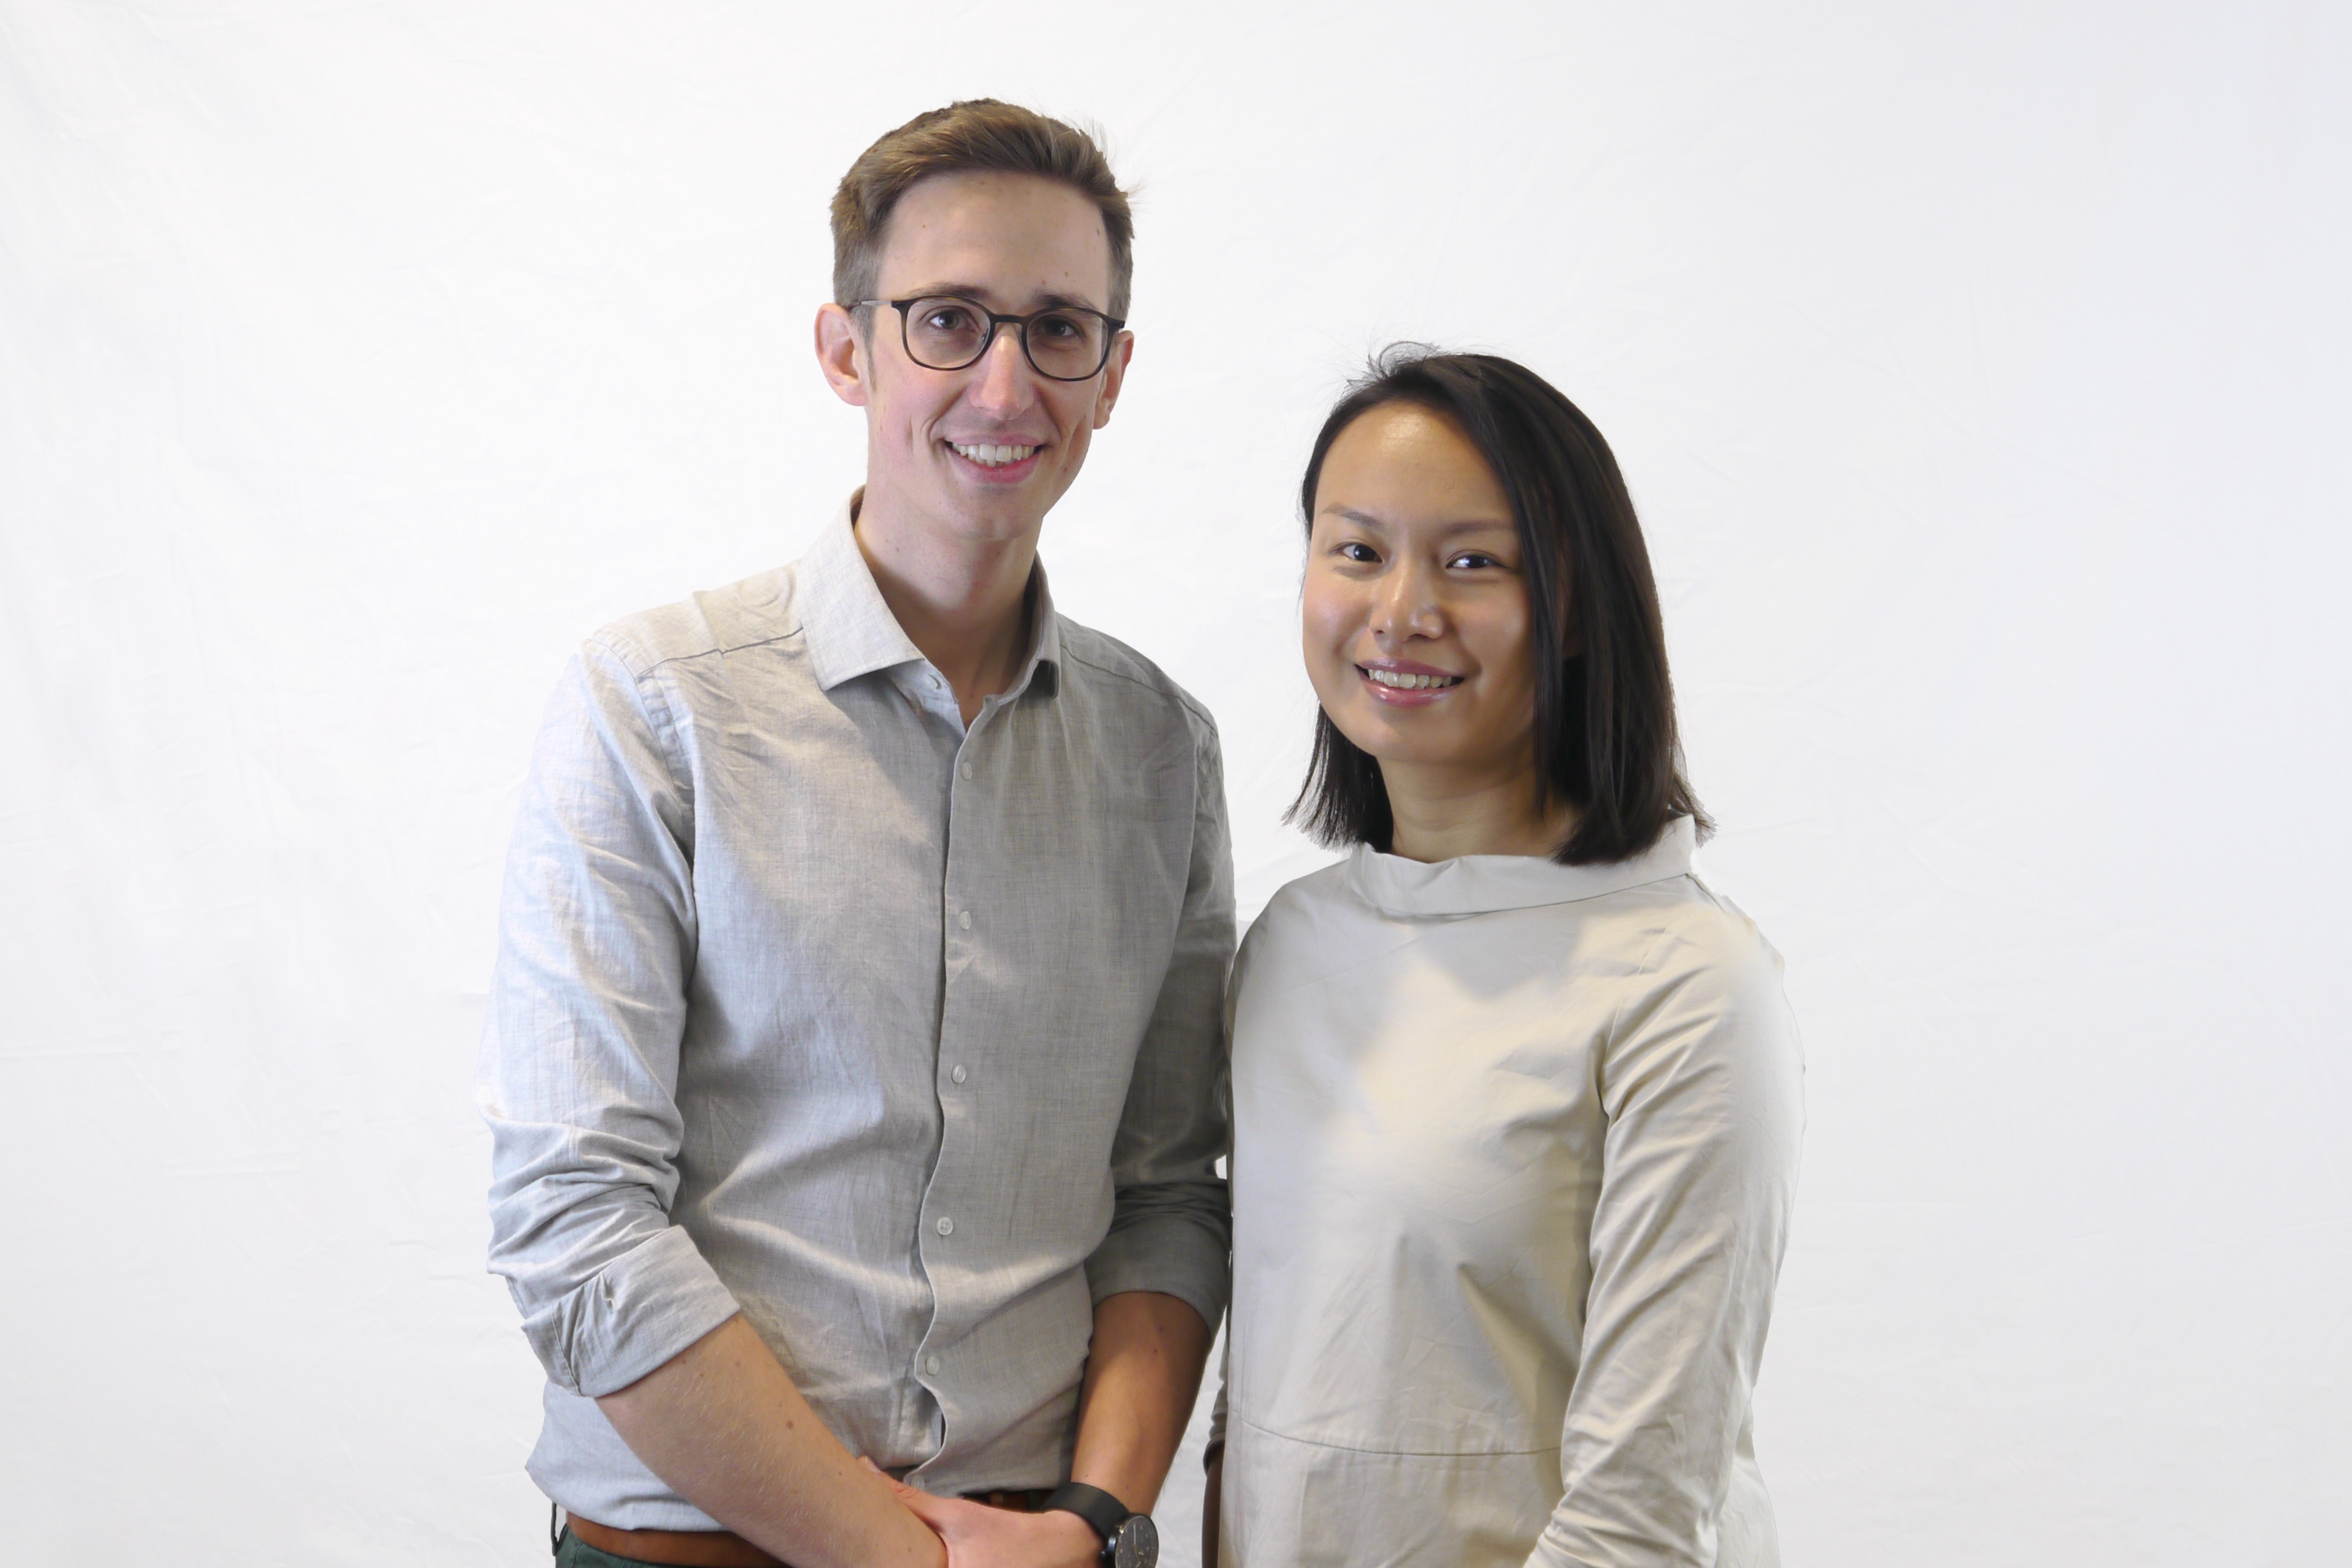 Sebastian Kosch and Quincy Poon founded Plank Optimization to help medical schools to match residents with hospitals.